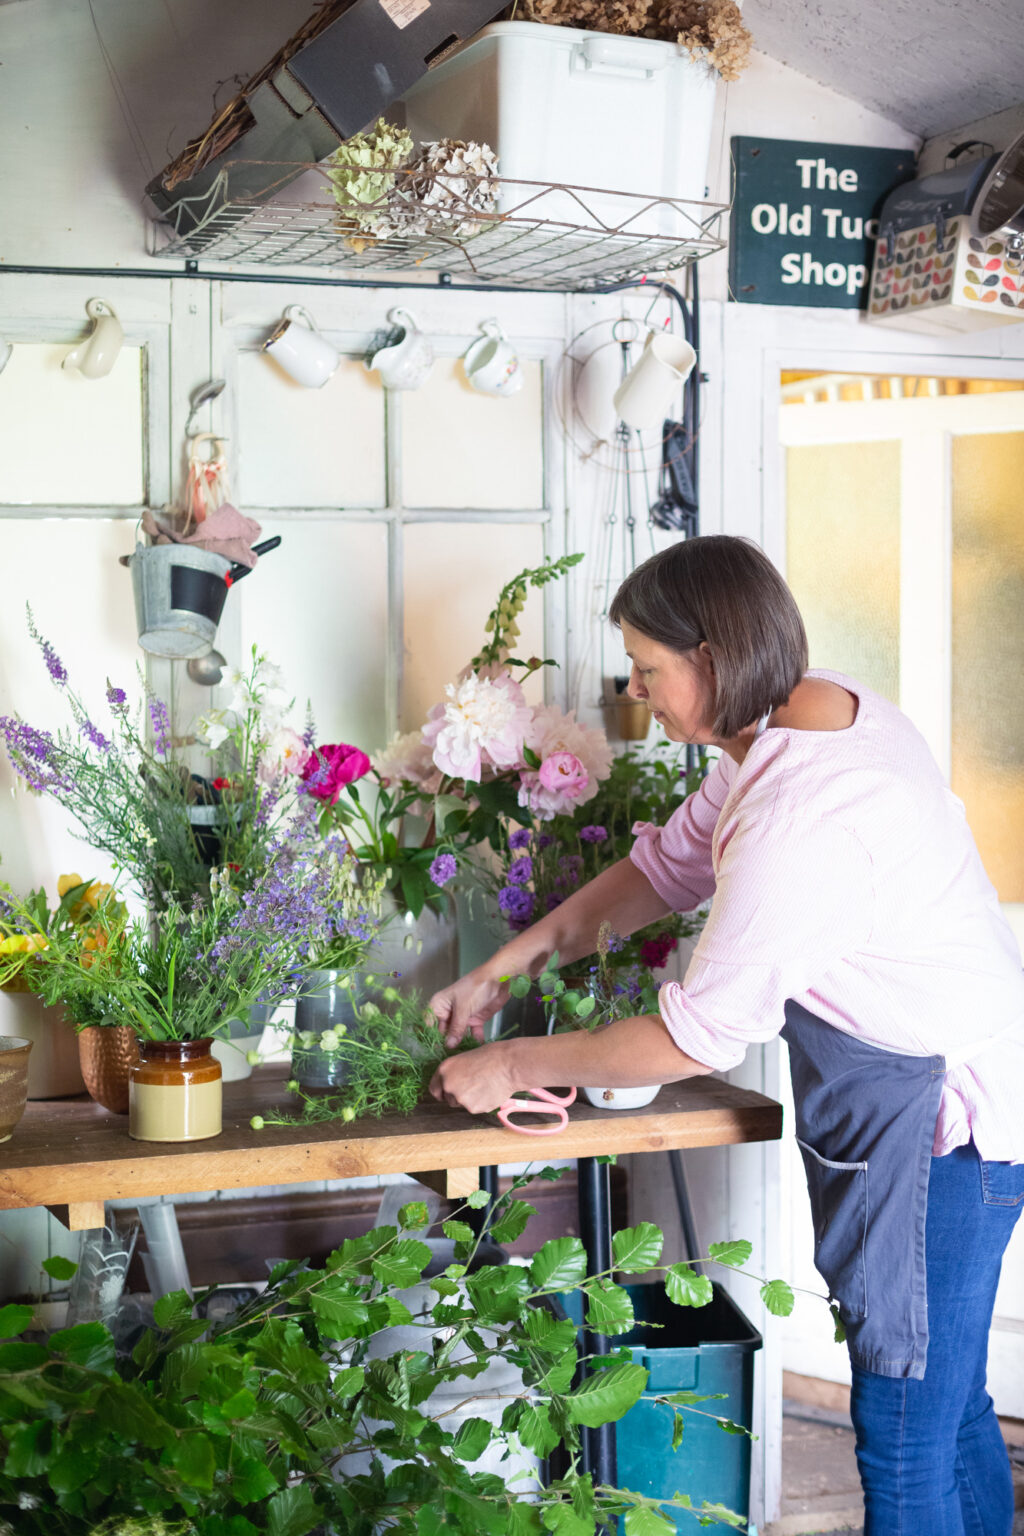 Carole of Tuckshop Flowers works from home in her garden workshop, making flowers for events, weddings and funerals.